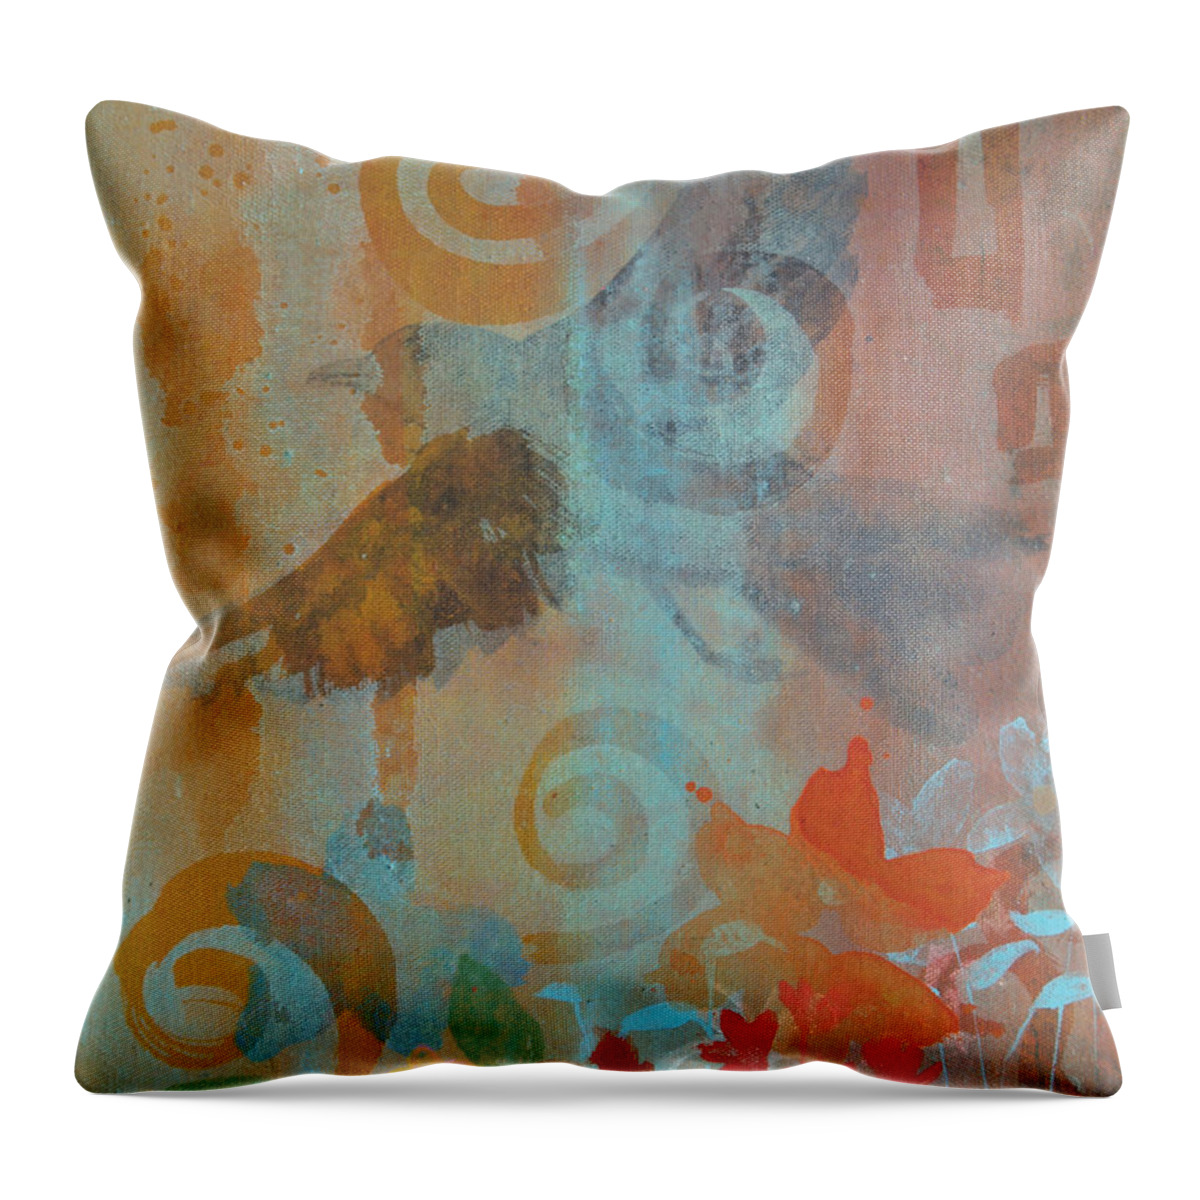 Libre Throw Pillow featuring the painting Pajaro Libre by Robin Pedrero